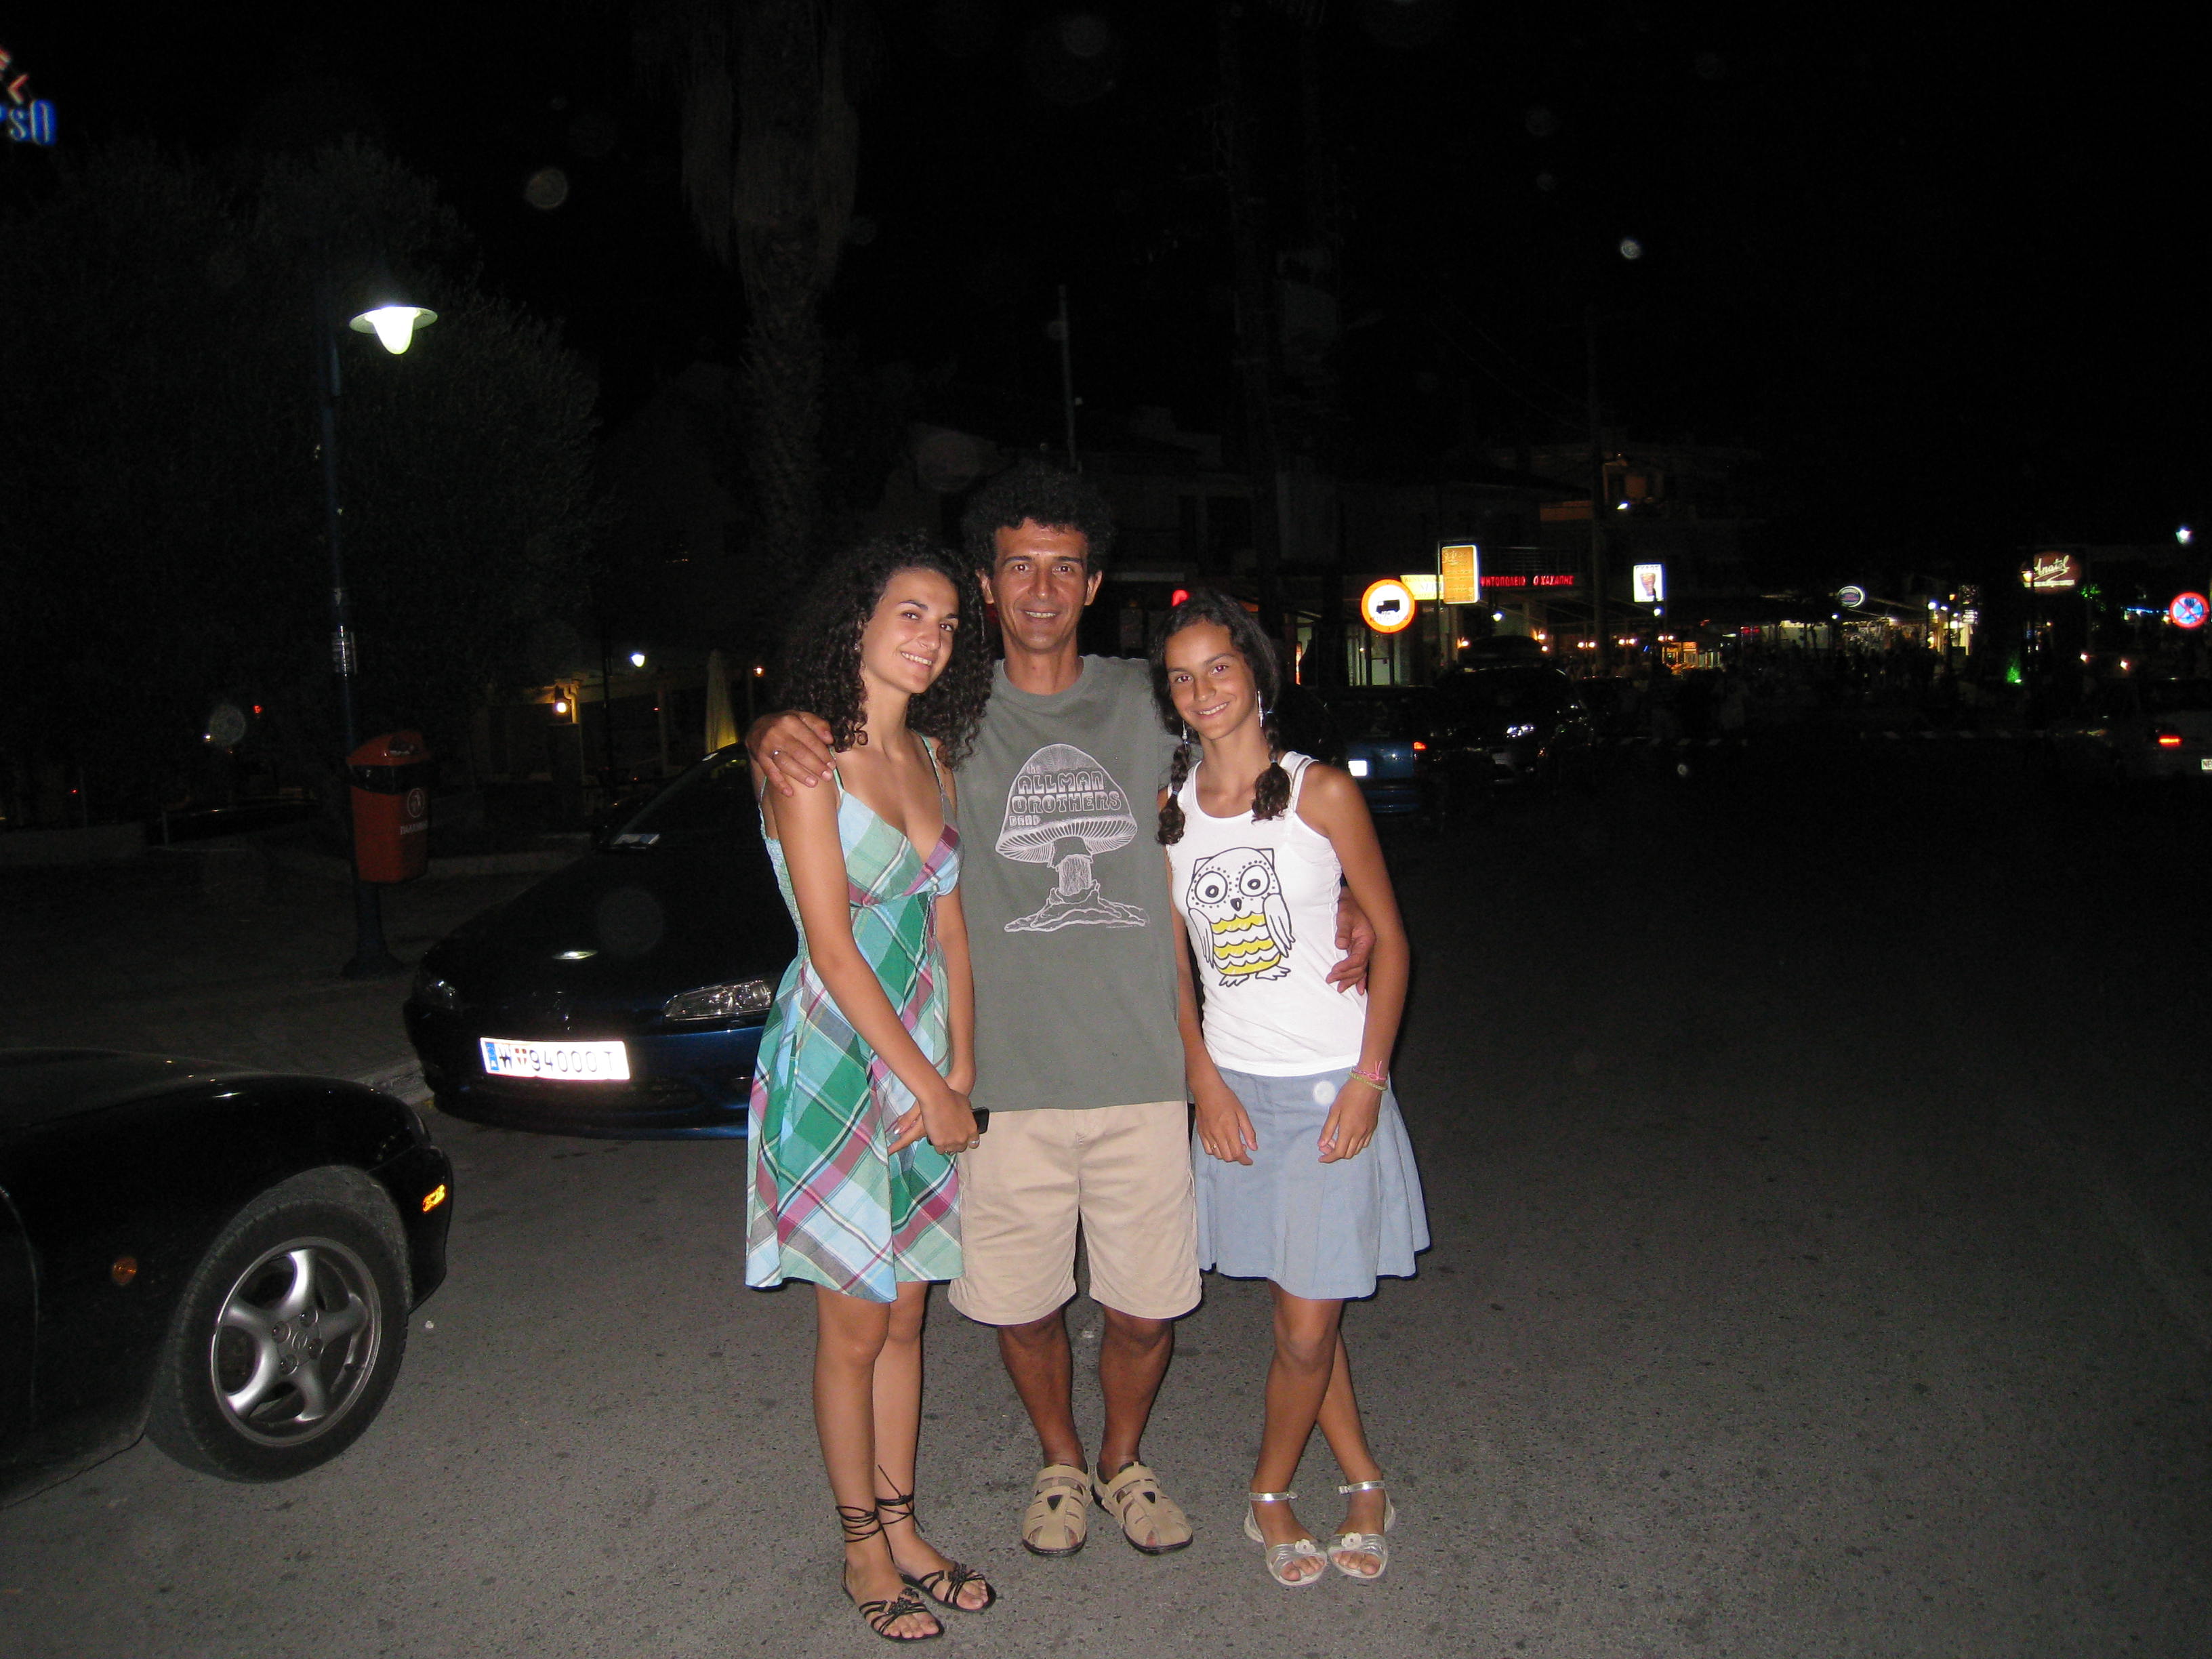 Two weeks ago in Greece, my dear older Sonja (17), me (lot of years) and dear younger Stasha (12). And, of course, my third love at pic: ABB!